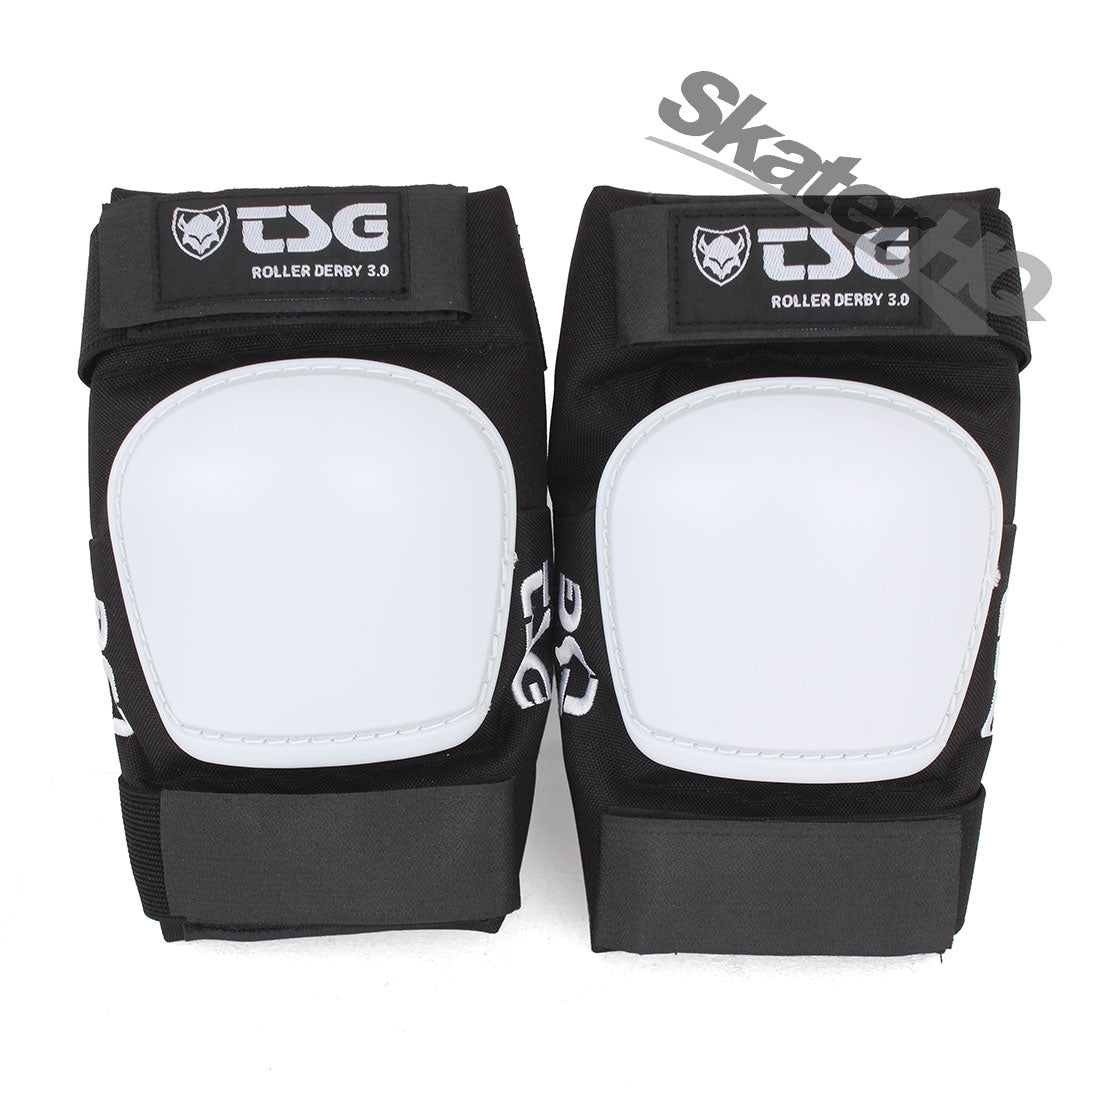 TSG Rollerderby Elbow 3.0 - Large Protective Gear